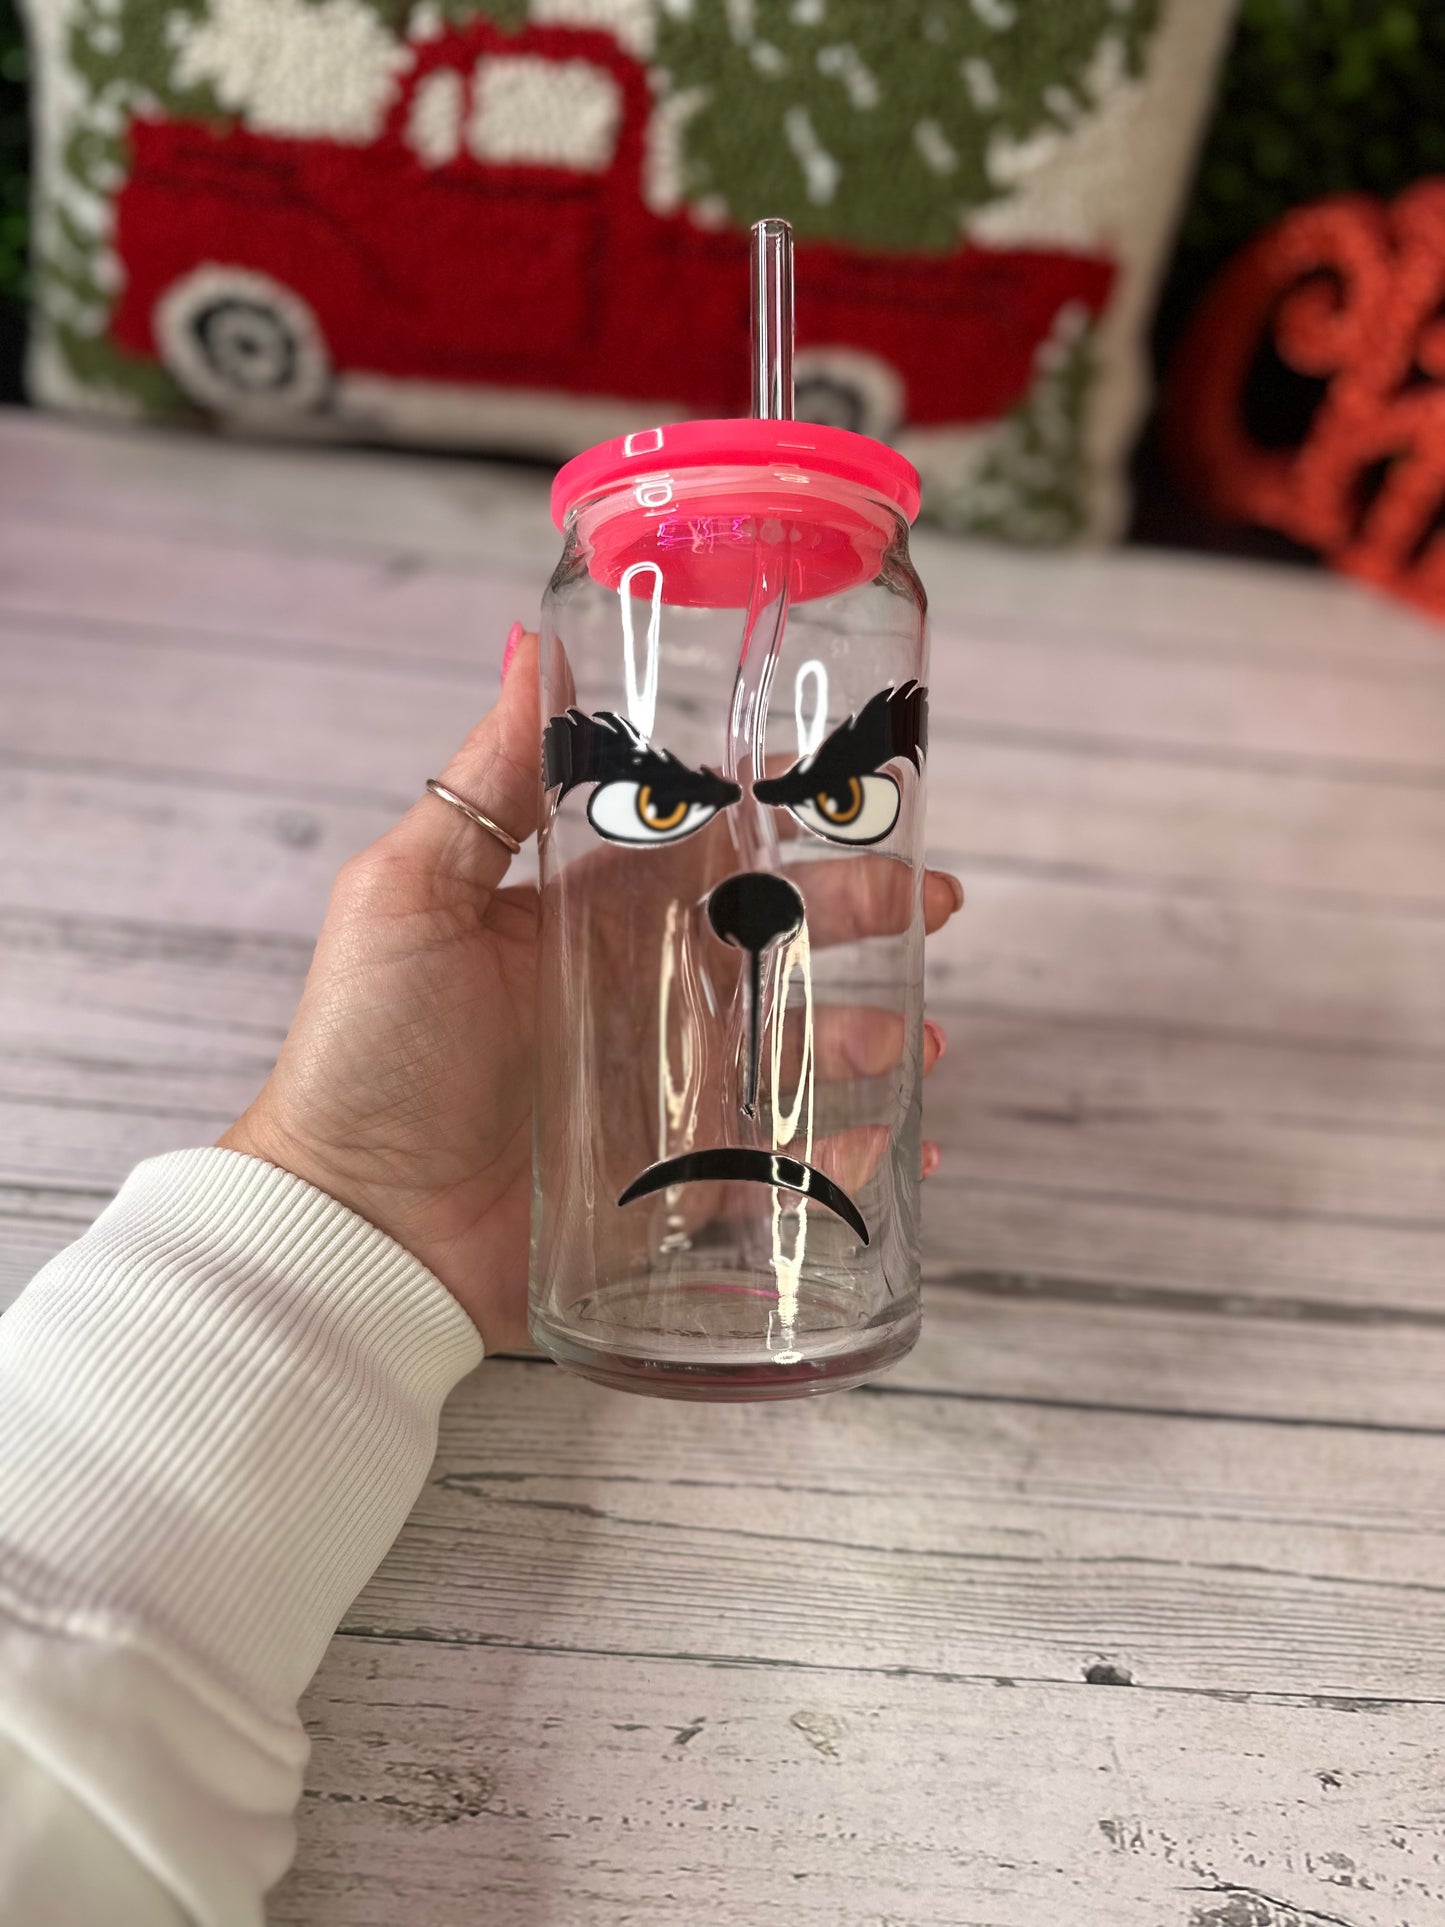 Mean Face Christmas Glass Cup